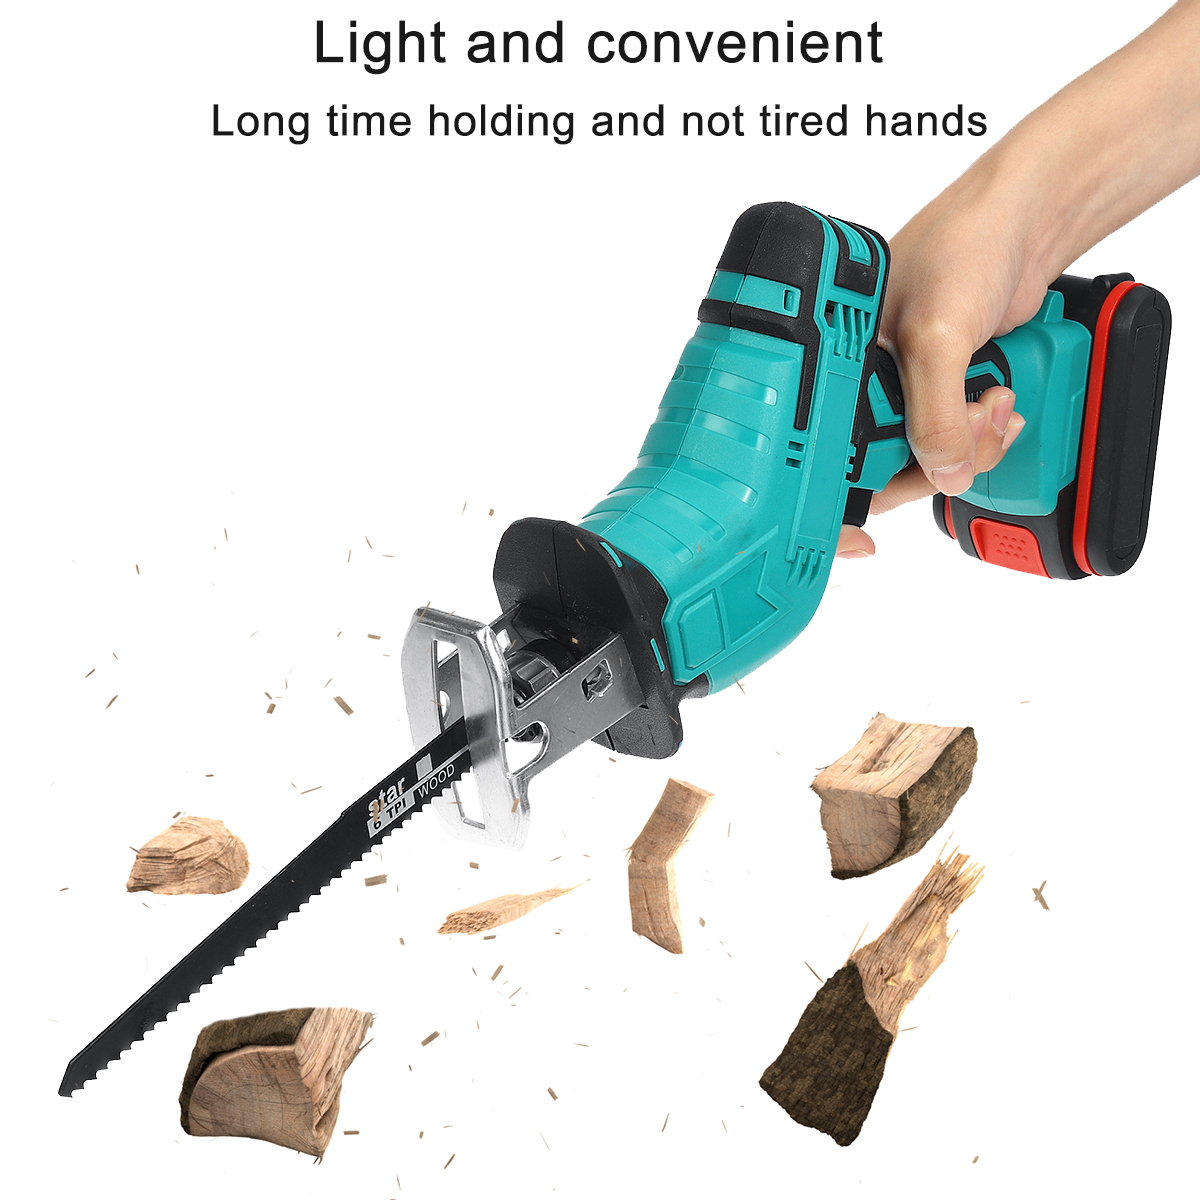 138VF-Rechargeable-Electric-Handheld-Saw-With-LED-4-Saw-Blades-Wood-Cutting-Tool-W-None1pc2pcs-Batte-1827869-1